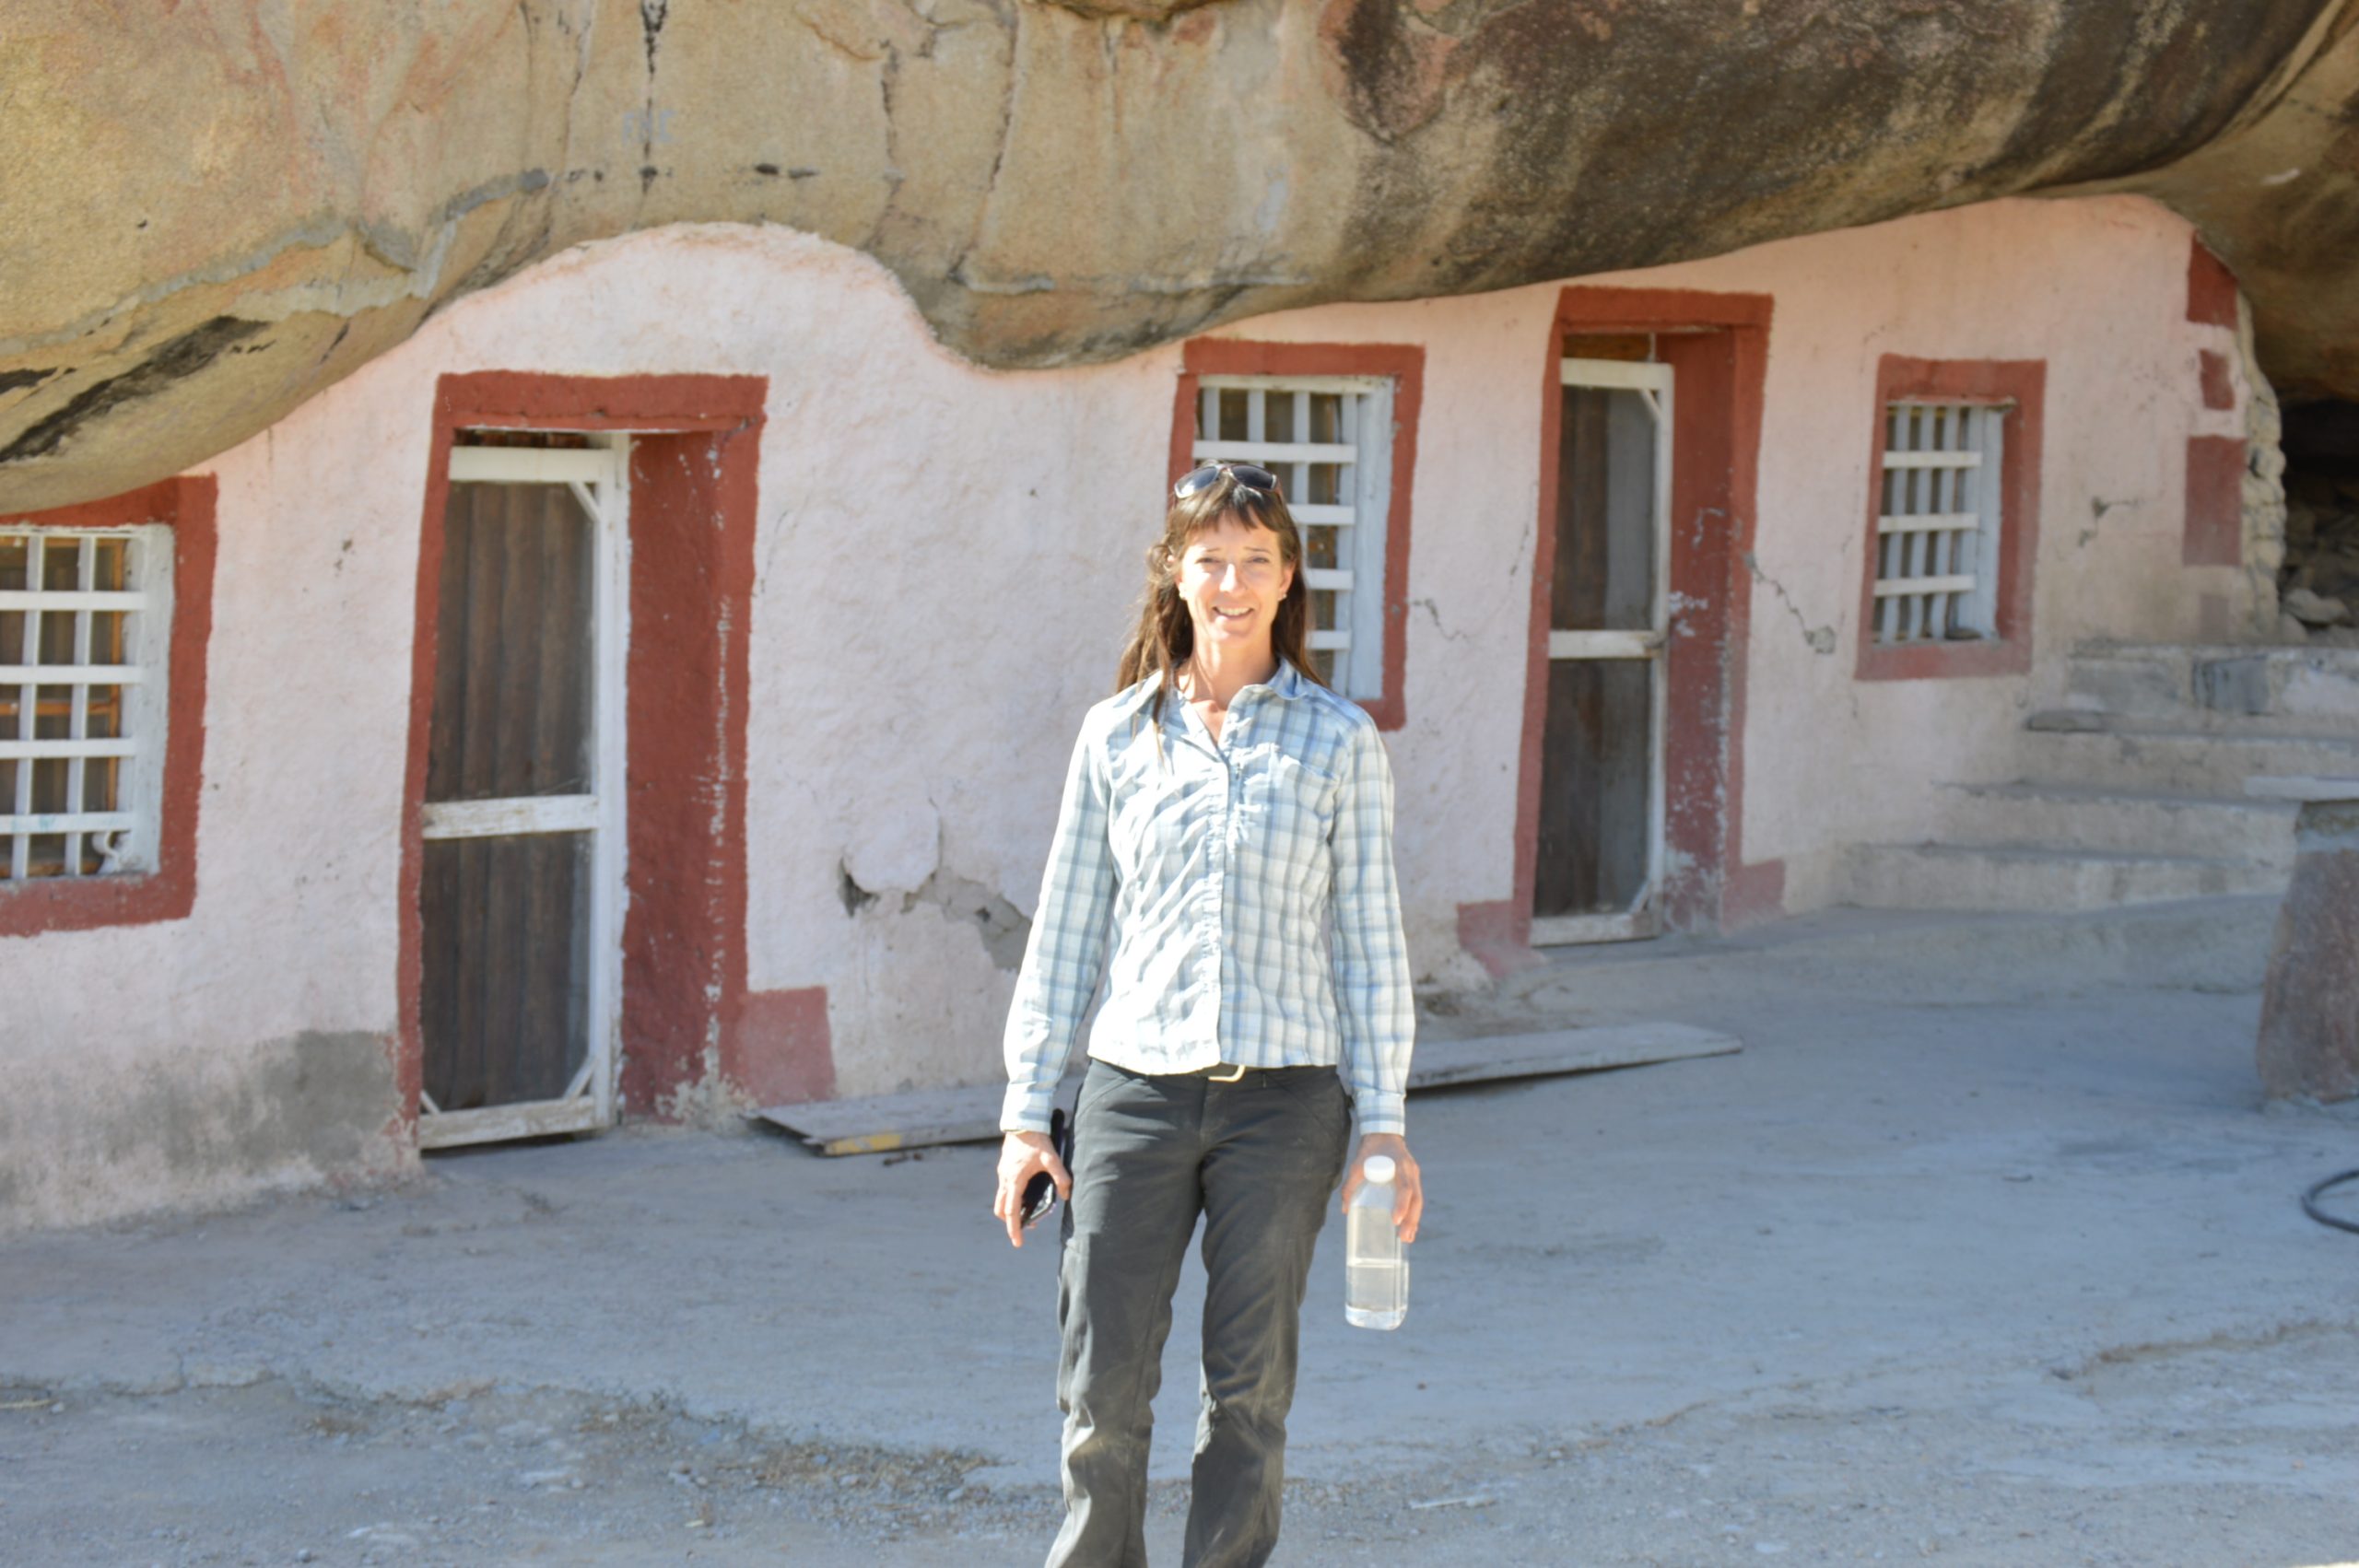 Woman standing in front of Casa Piedra, near Boquillas, Mexico.